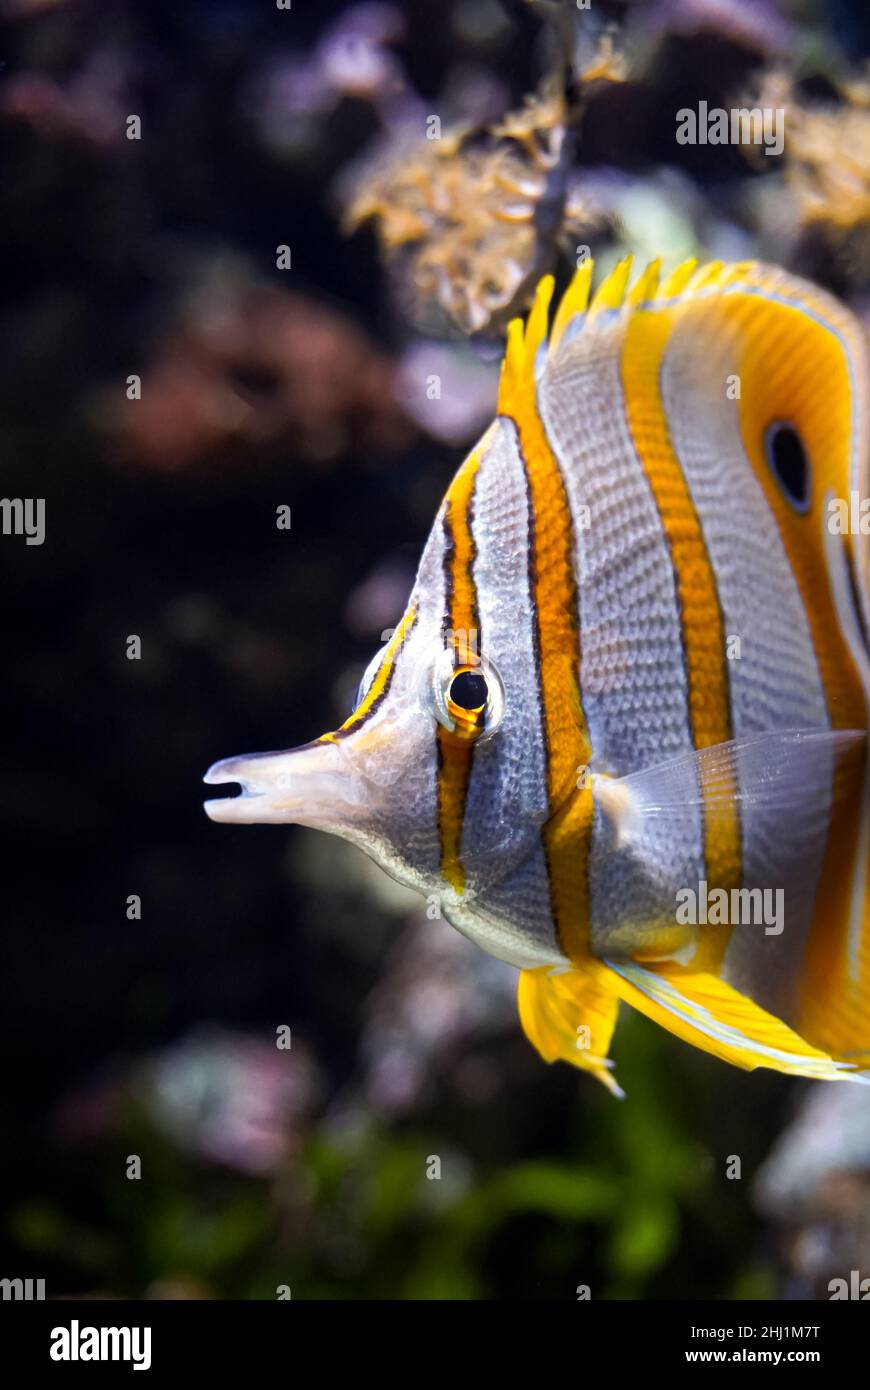 Butterflyfish head in the ocean in front of coral reefs Stock Photo